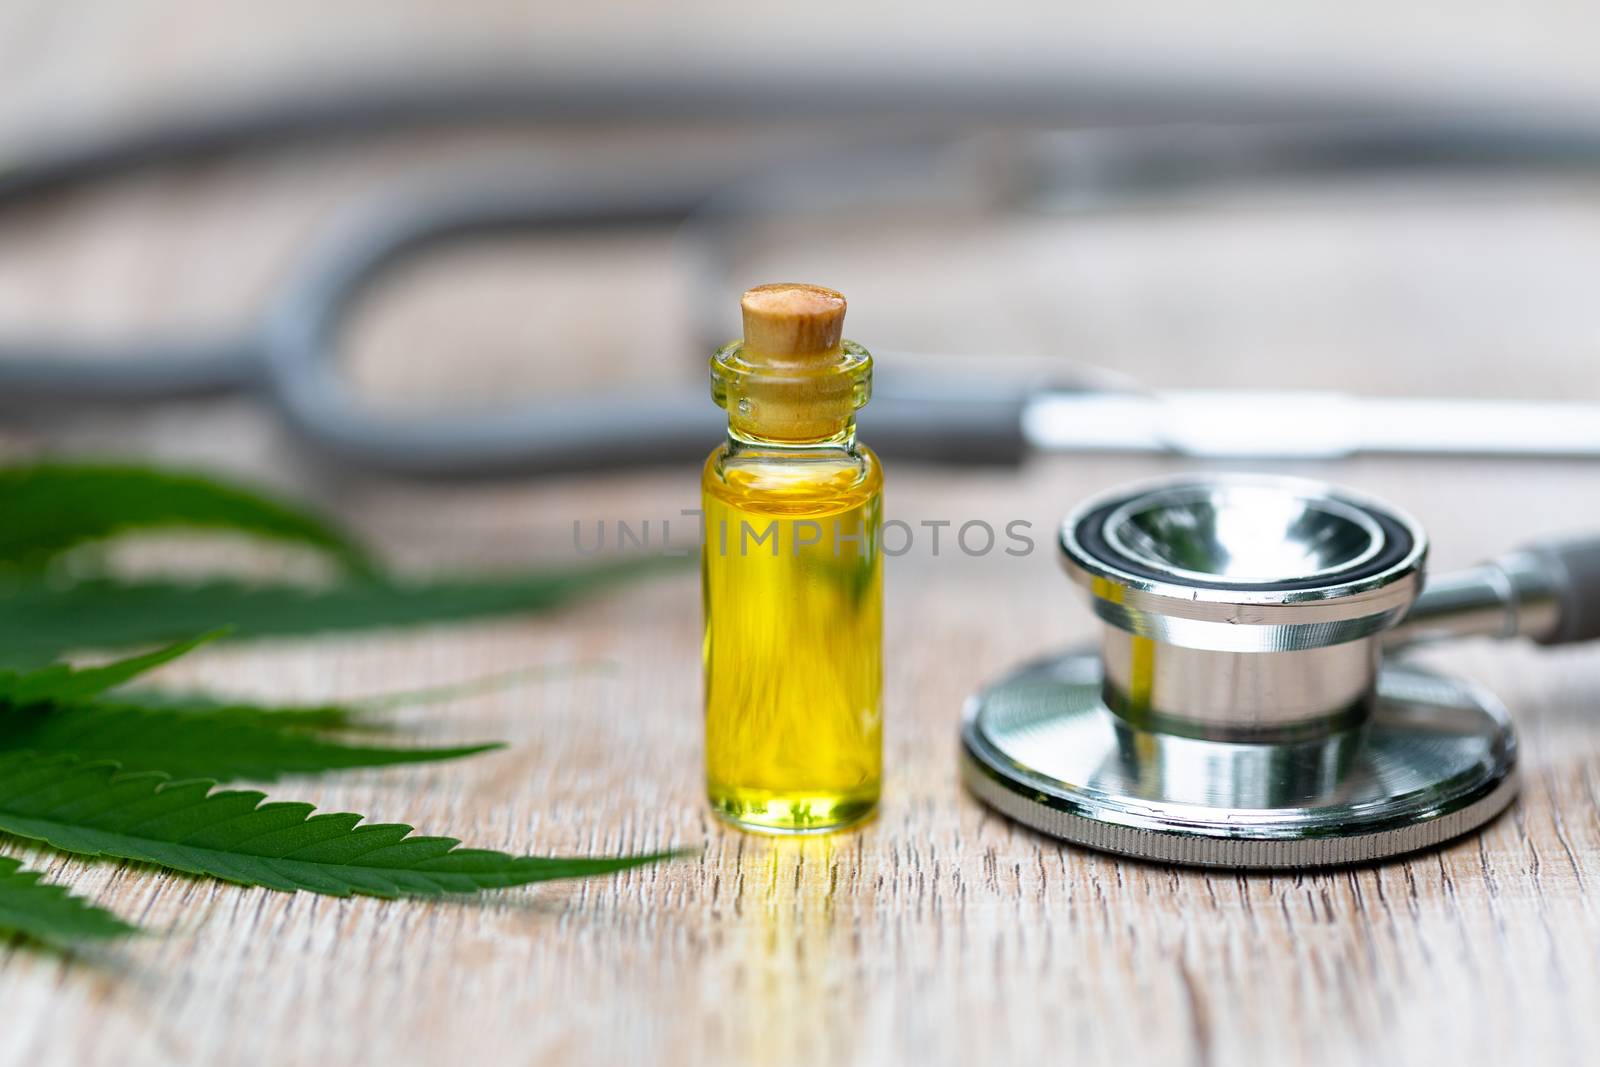 Hemp oil bottle Medical stethoscope And the leaves of cannabis Placed on the table. Concepts of alternative medicine, treatment of diseases. The invention of natural herbs as a treatment medicine.